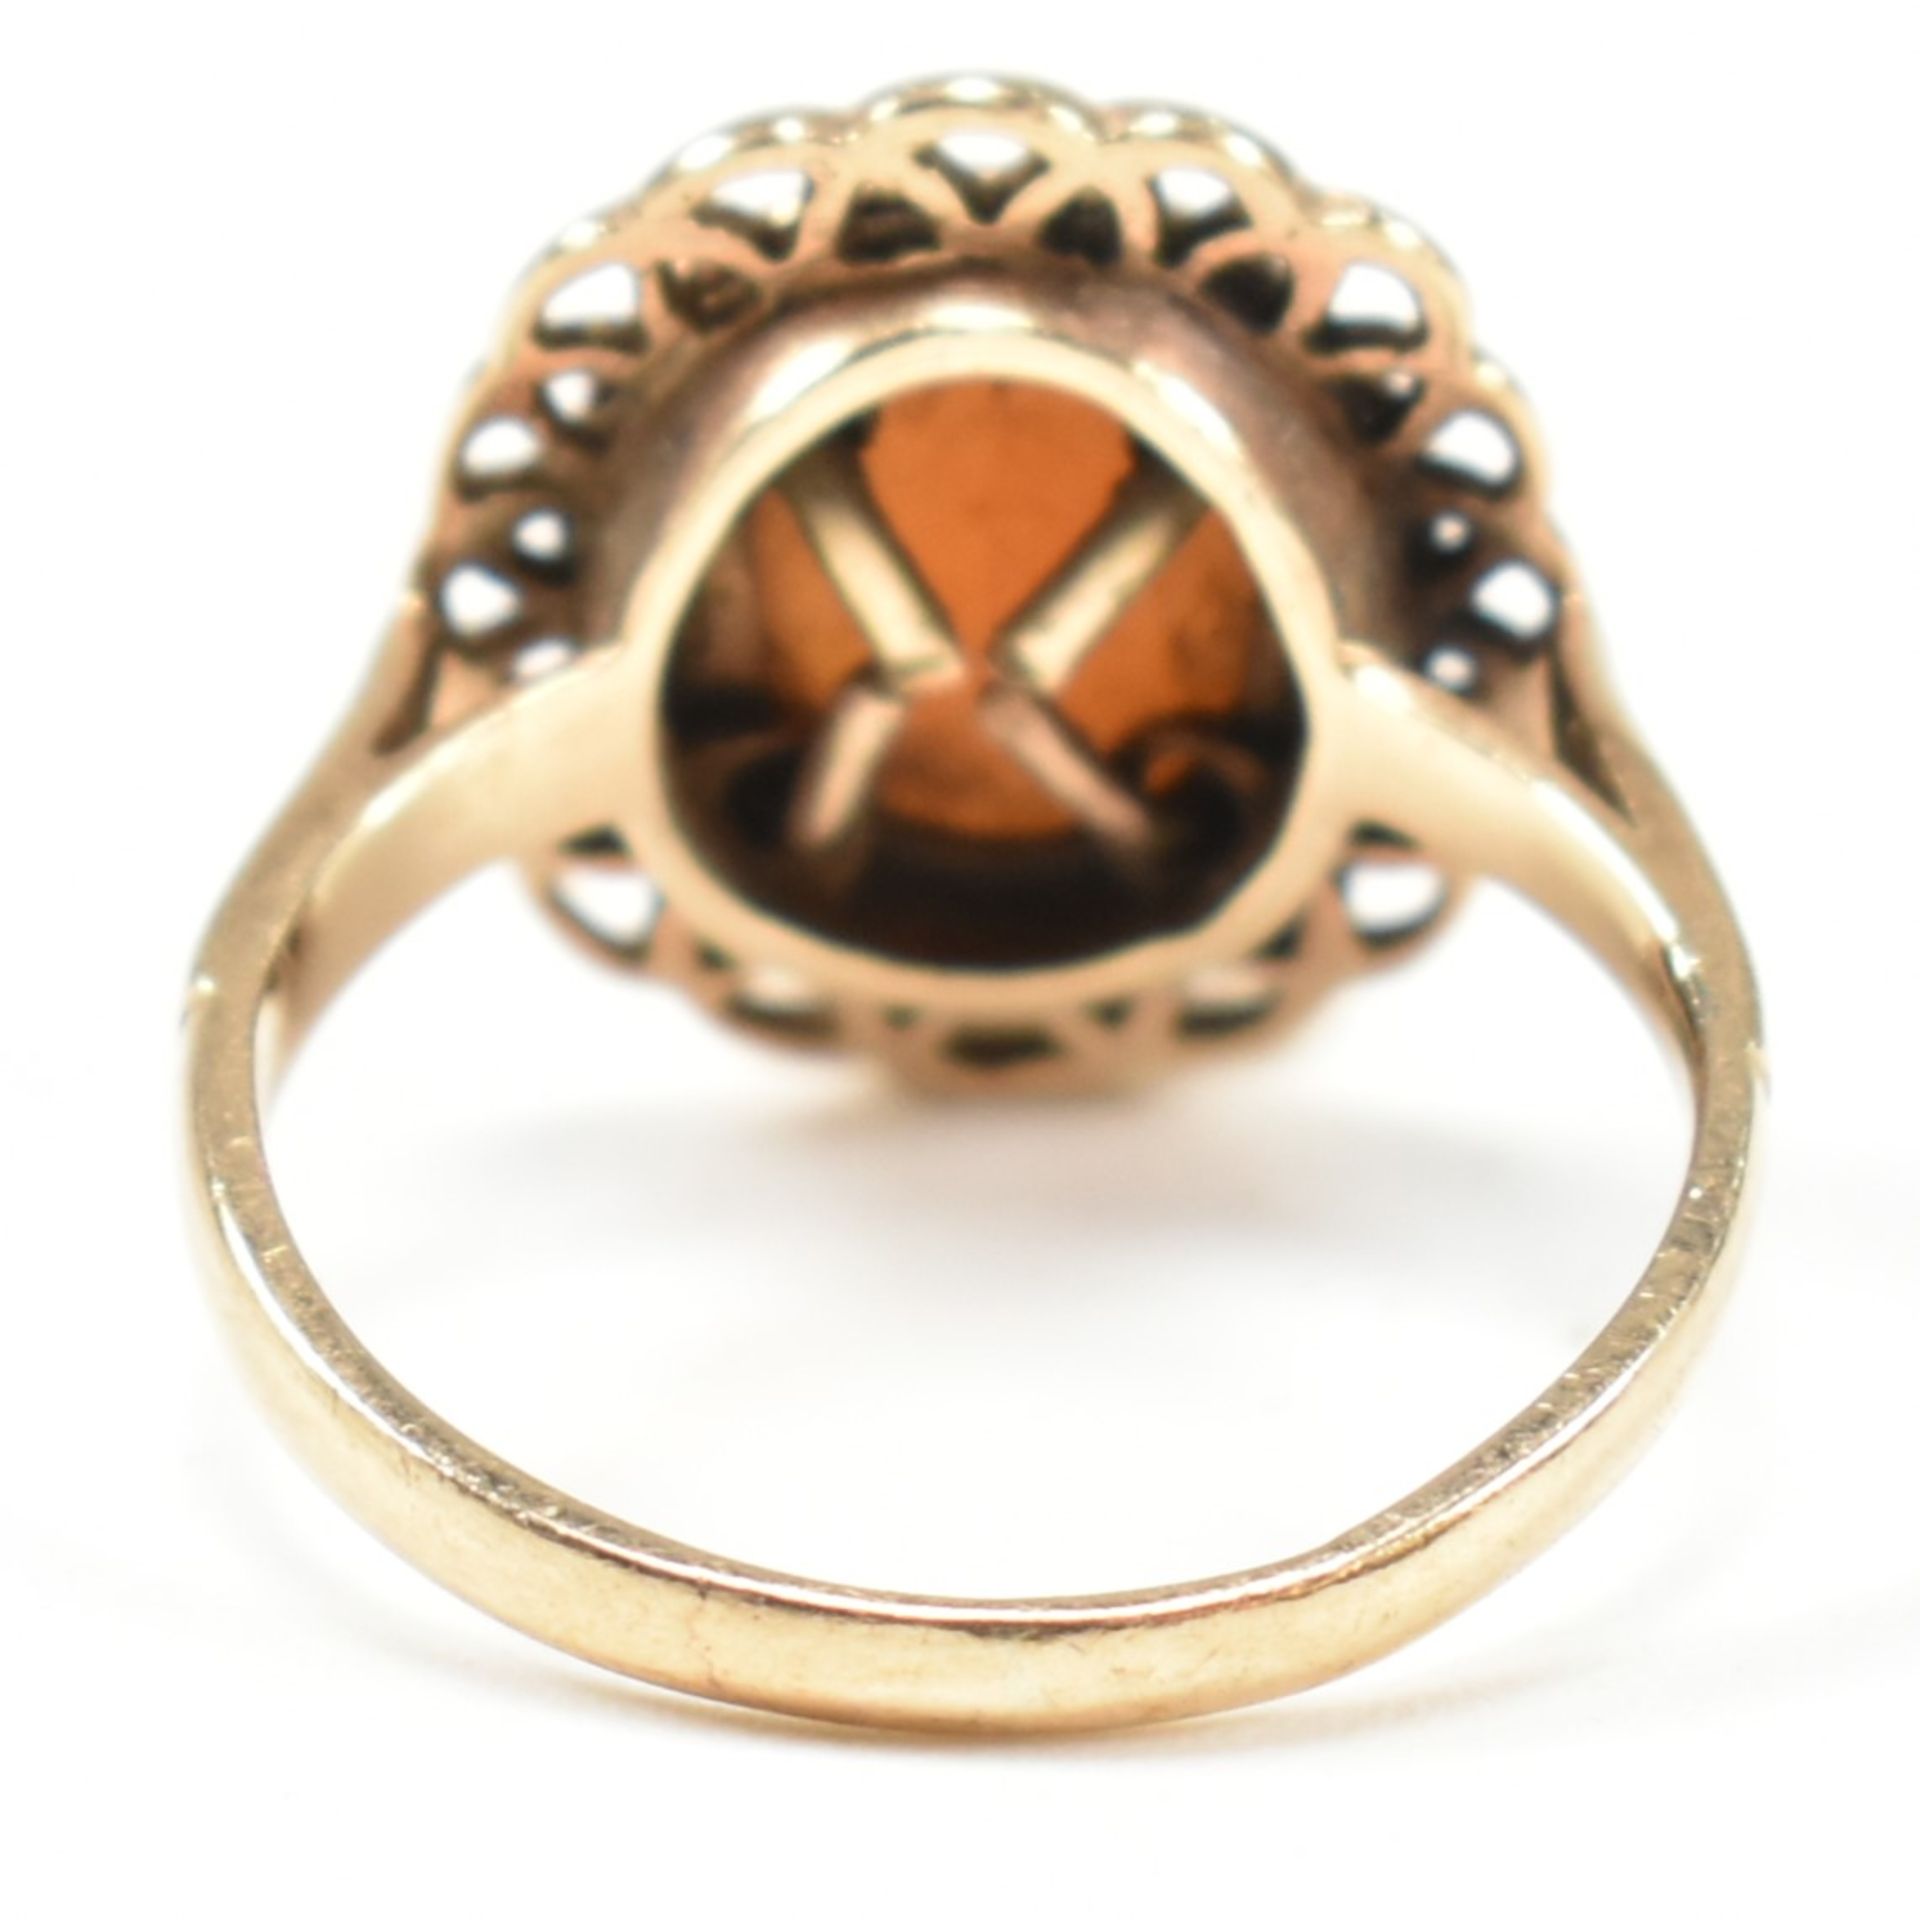 HALLMARKED 9CT GOLD & CARVED SHELL CAMEO RING - Image 3 of 8